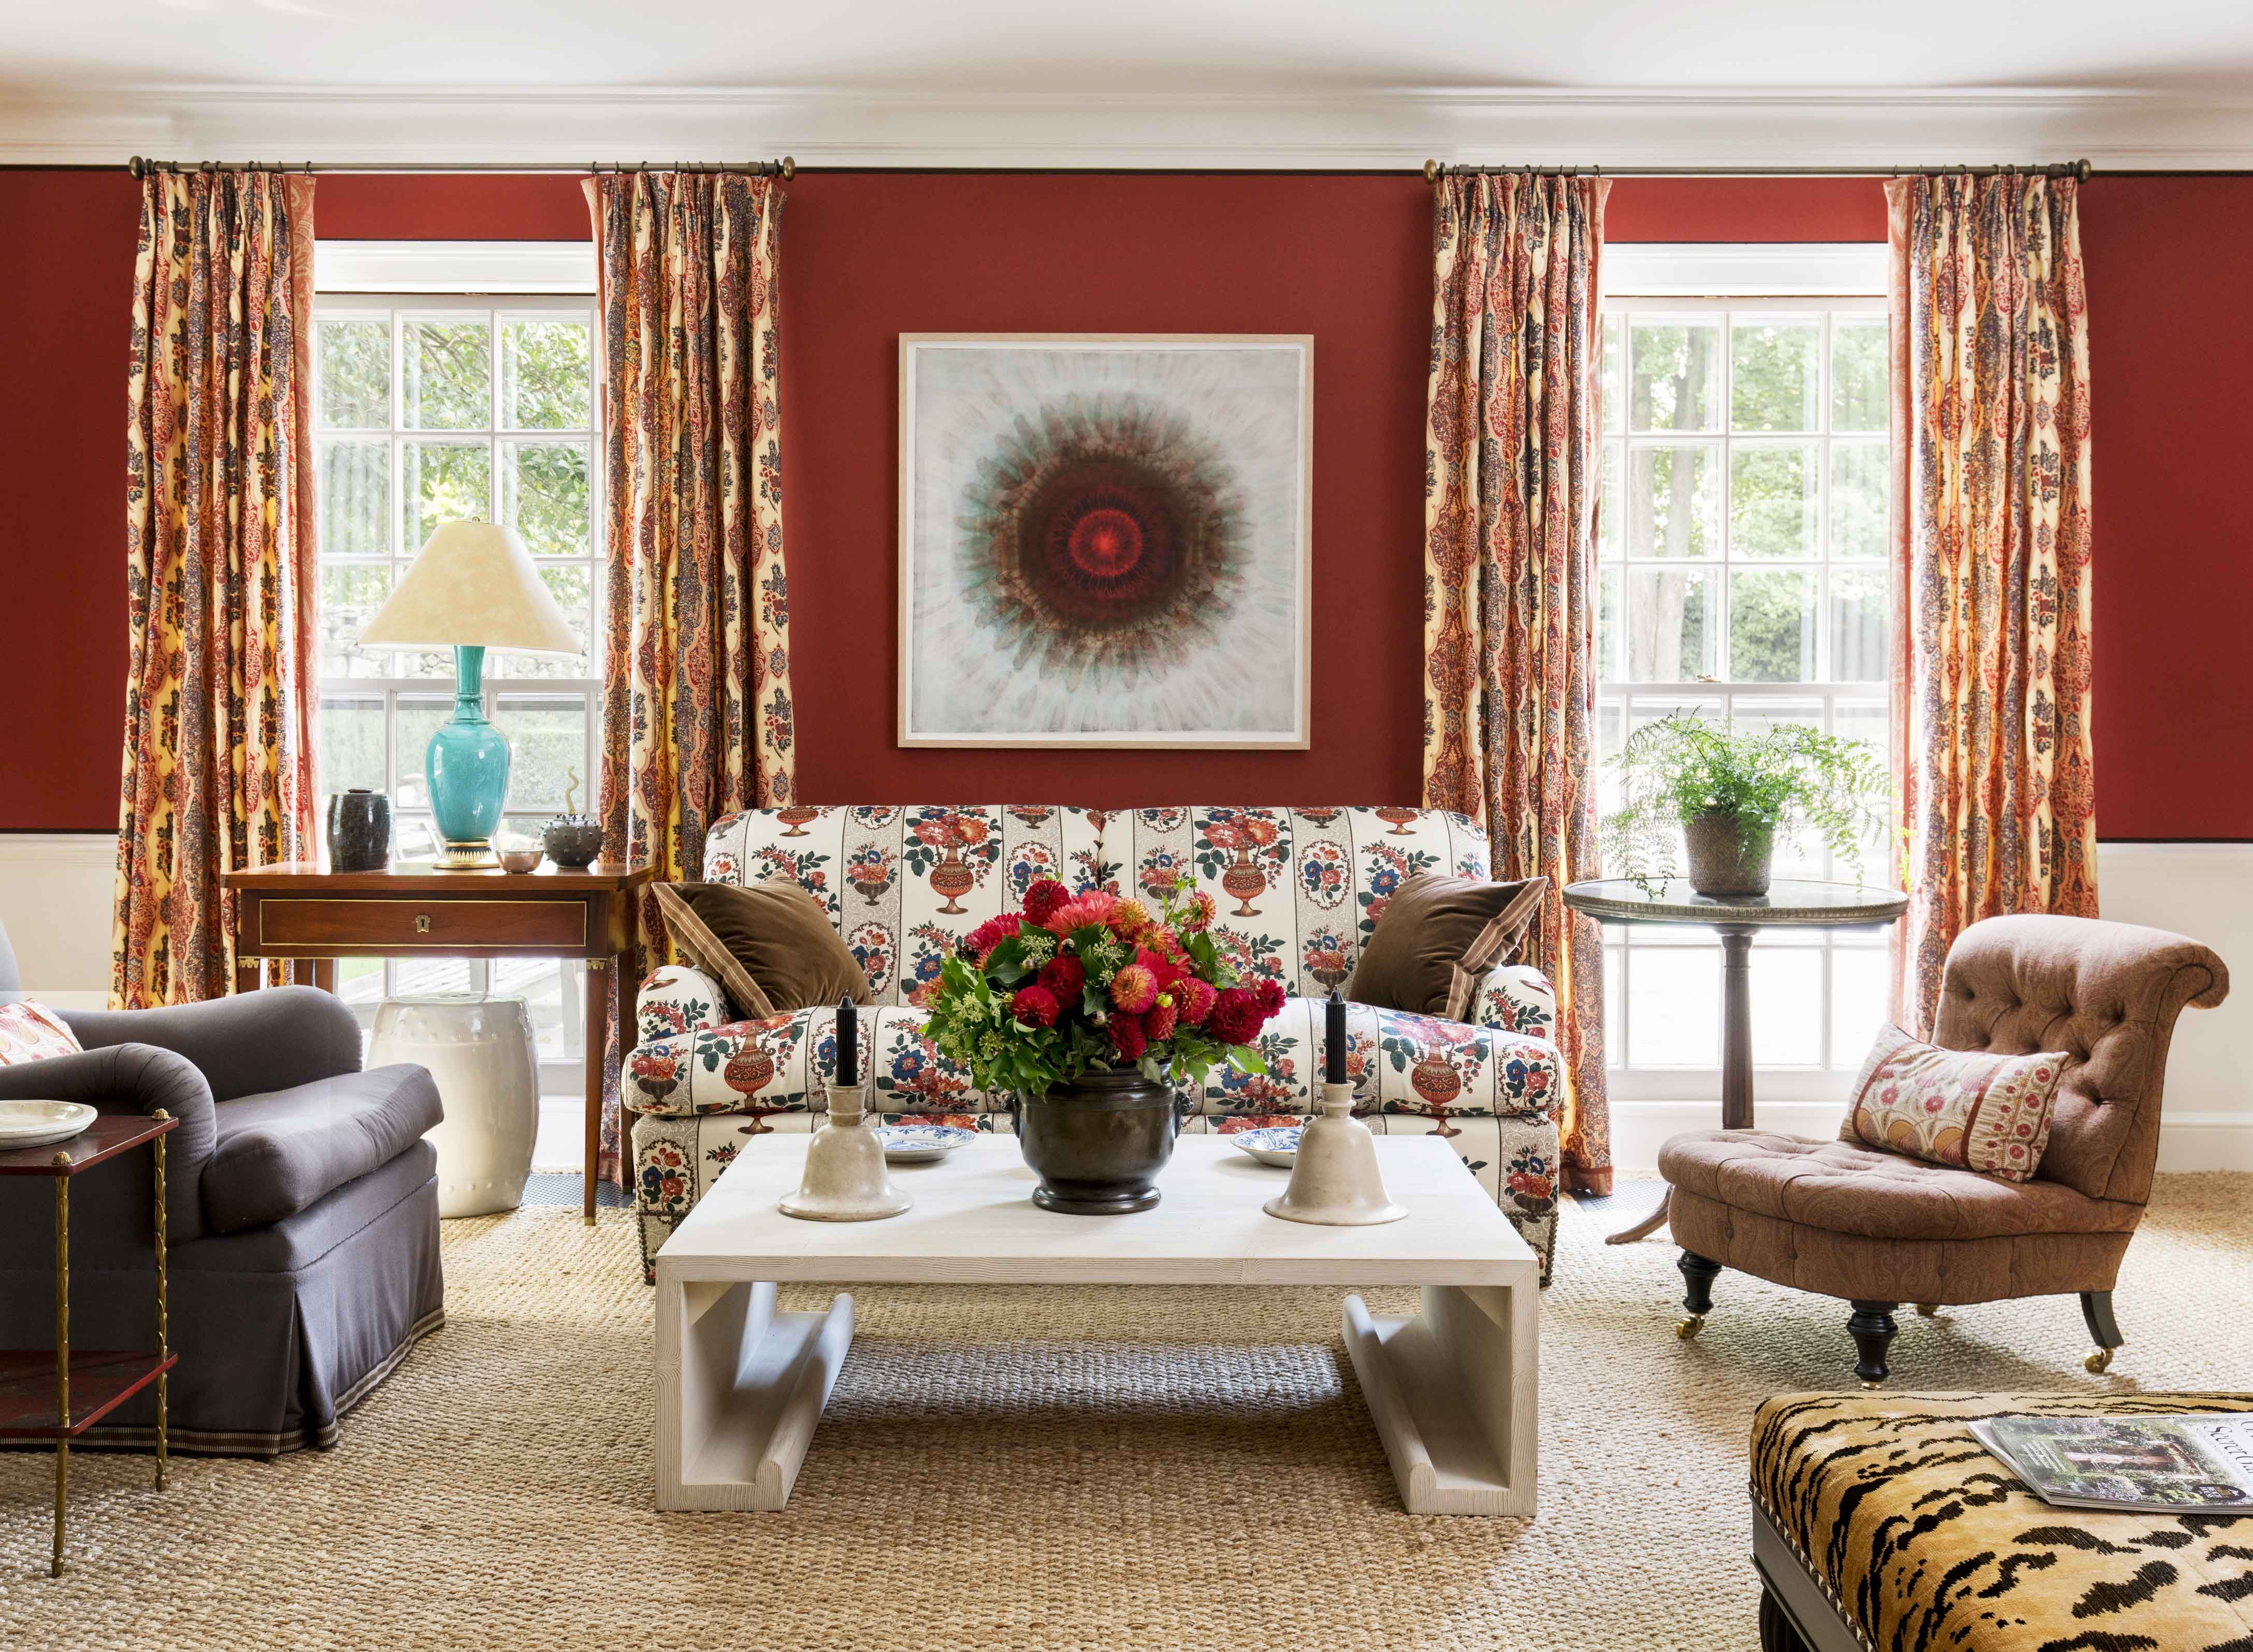 12 Best Red Room Ideas How To Decorate With